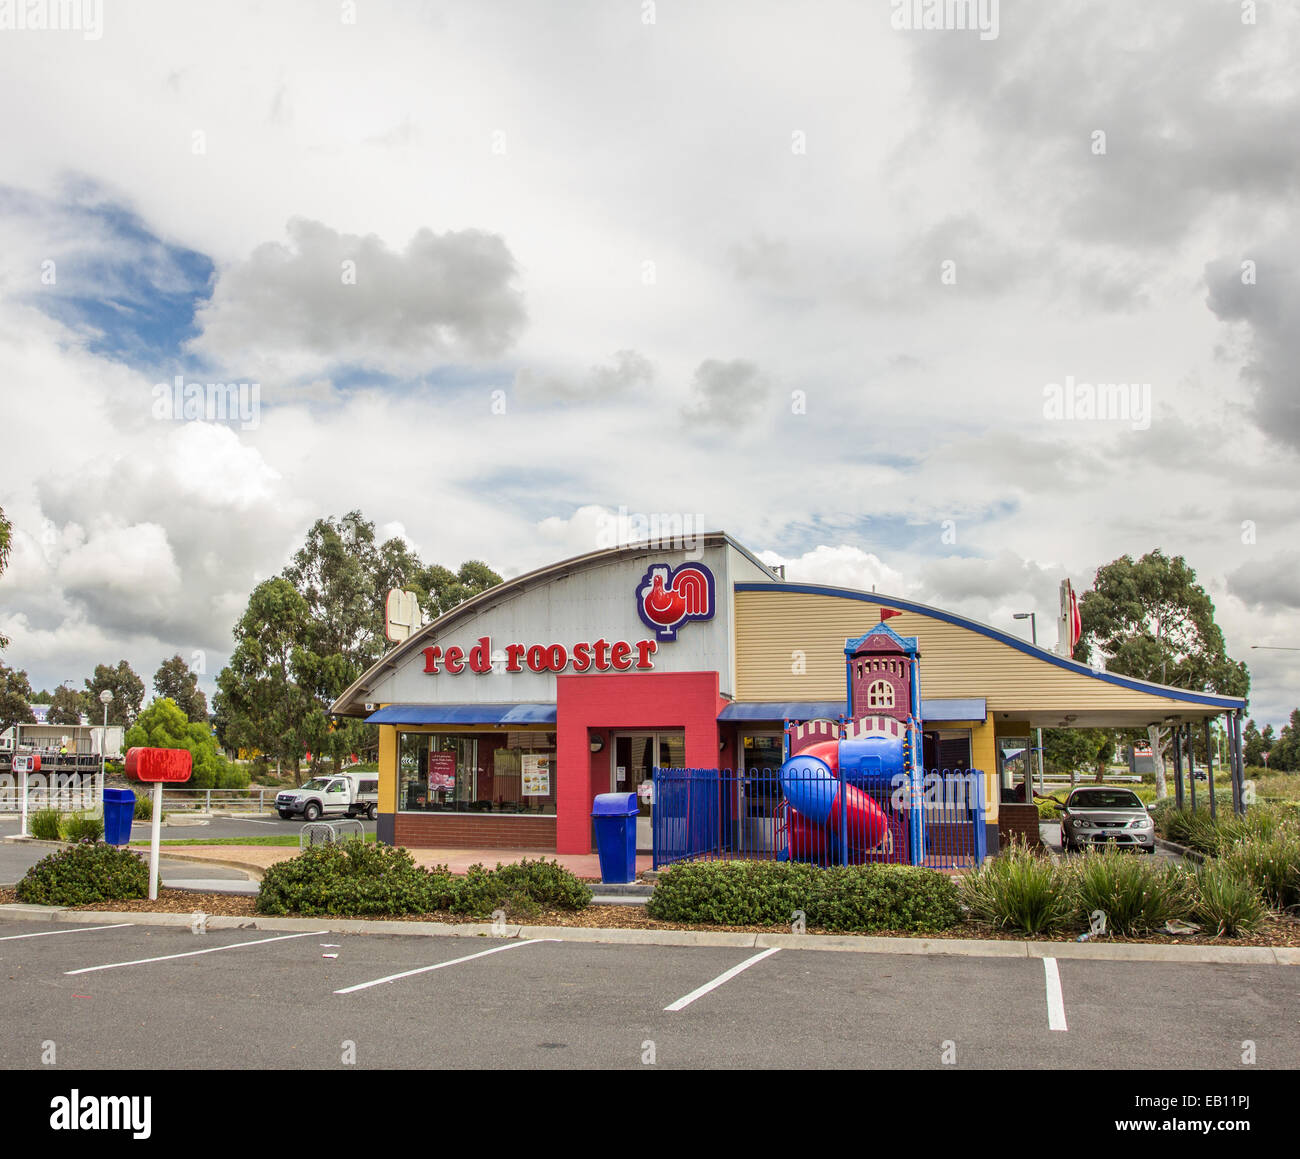 Red Rooster take away chicken shop and restaurant. Stock Photo